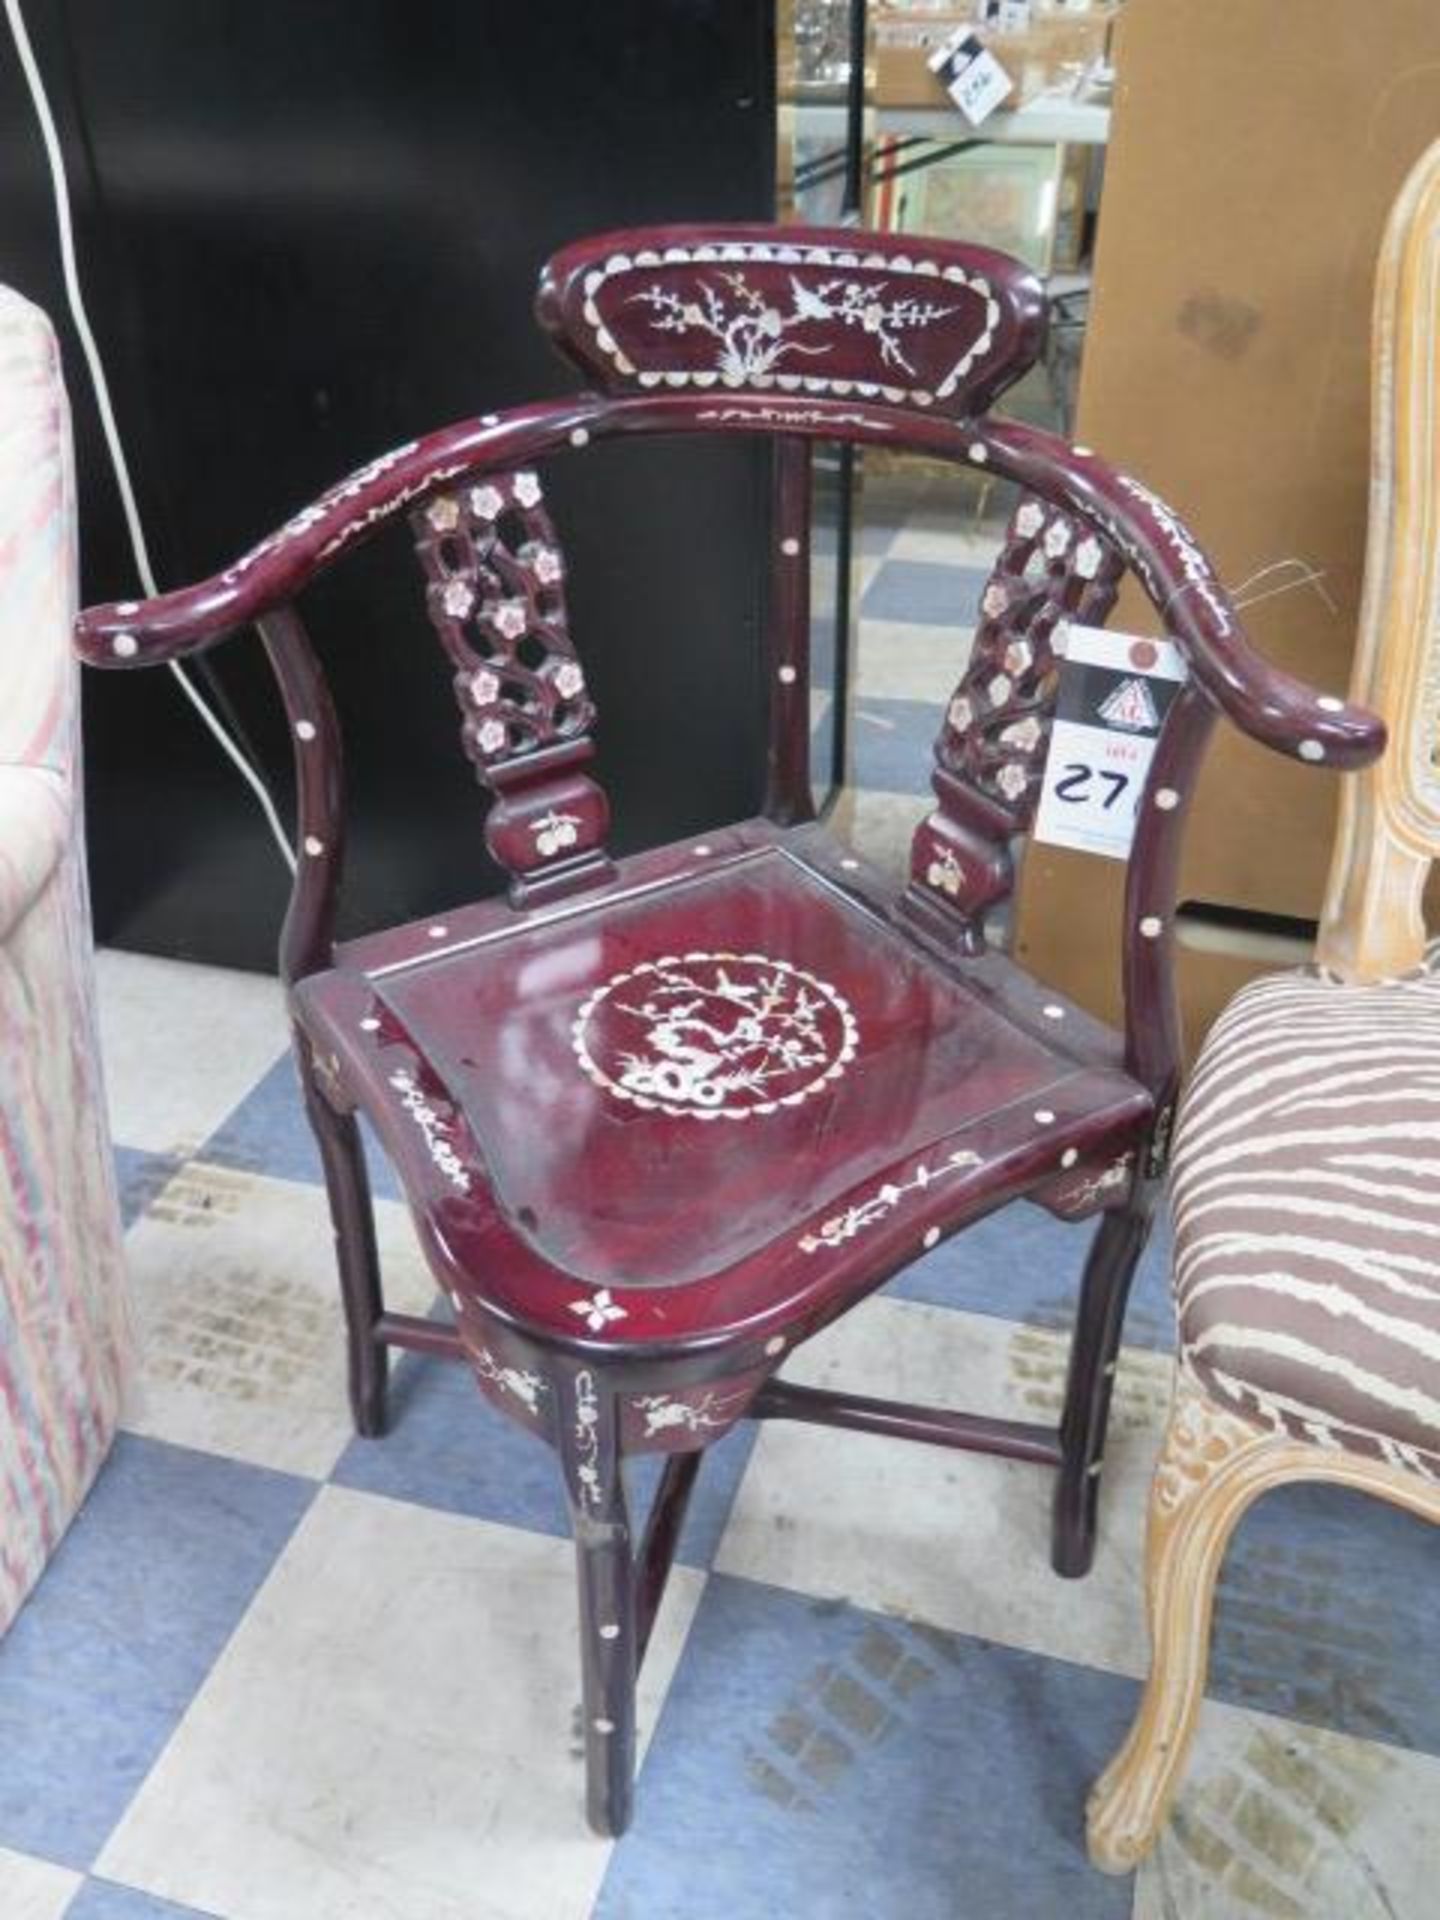 Vintage Corner Chair w/ Mother of Pearl Inlays and Vintage Style French Cane Back Chair (SOLD AS-IS - Image 2 of 10